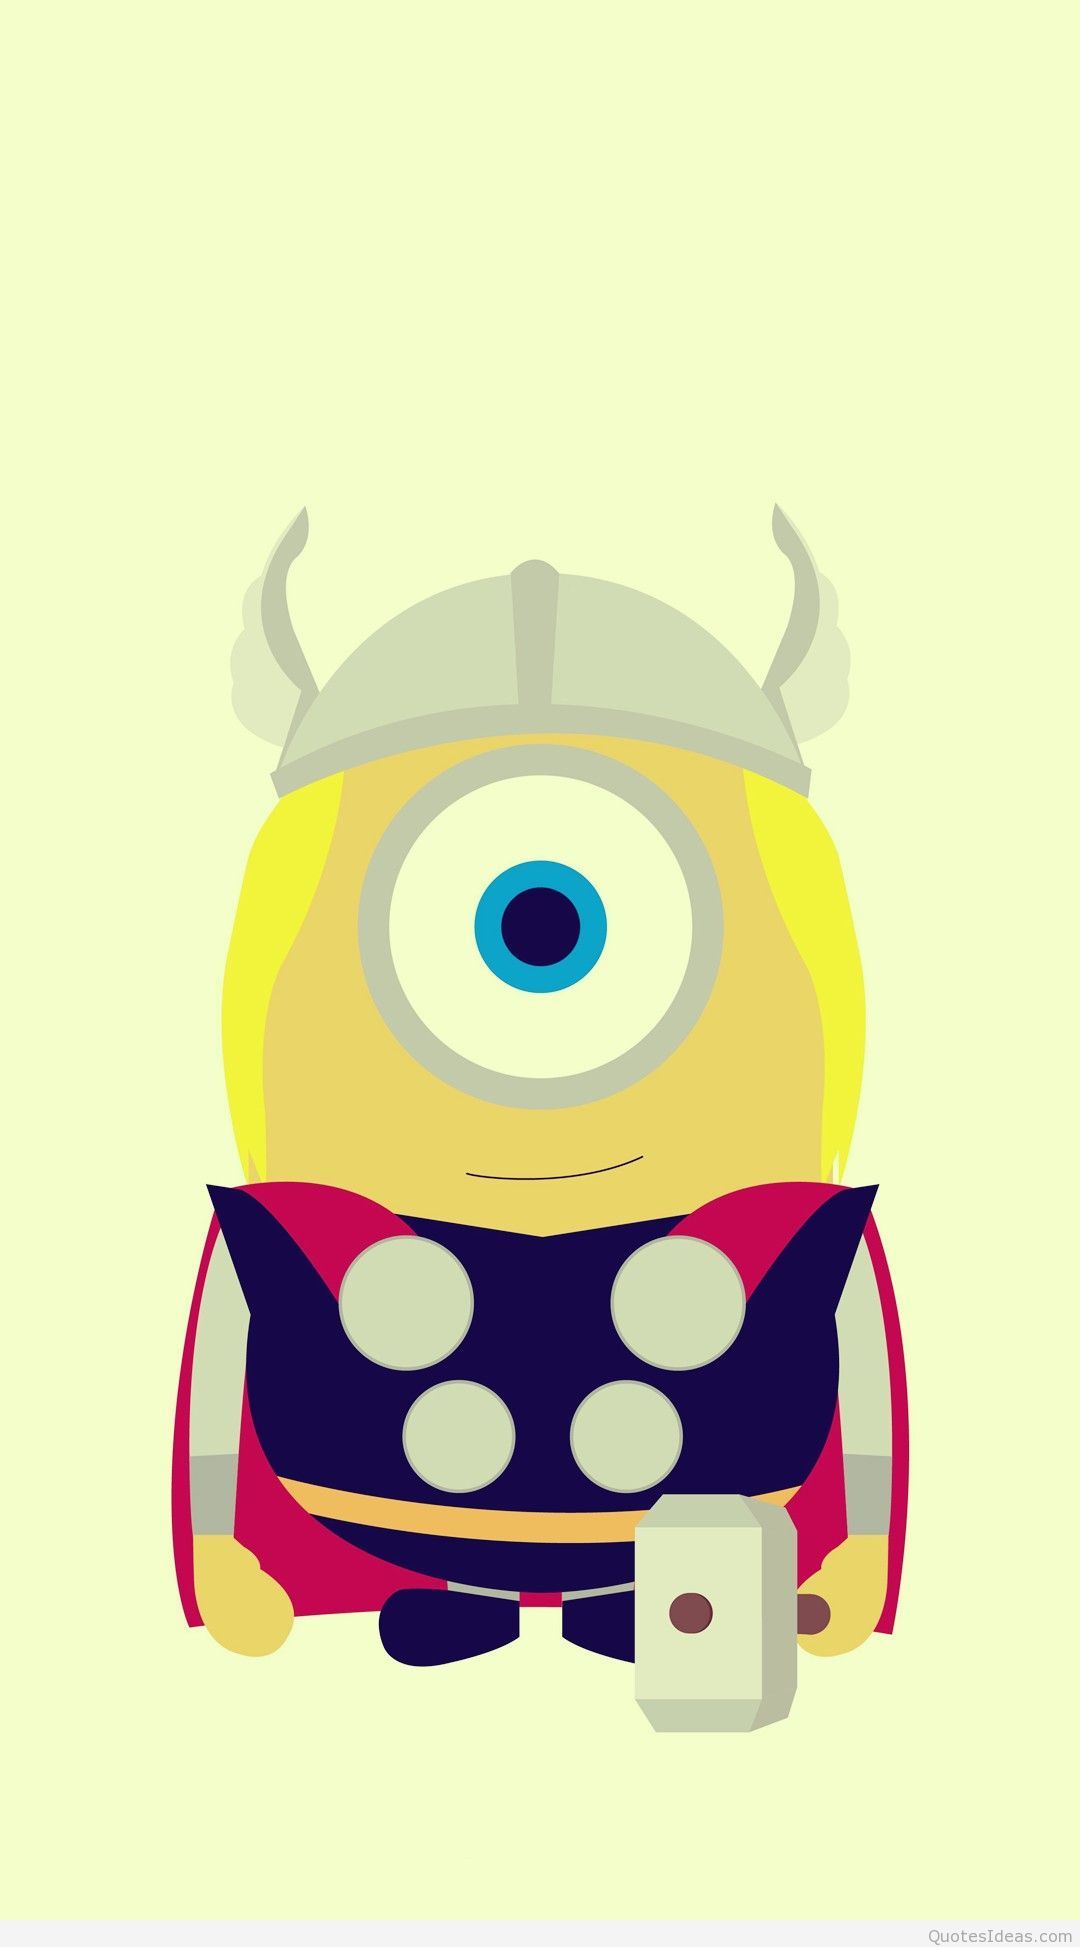 Funny Thor Minion Avengers iPhone 6 Plus Wallpaper HD Wallpaper For iPhone